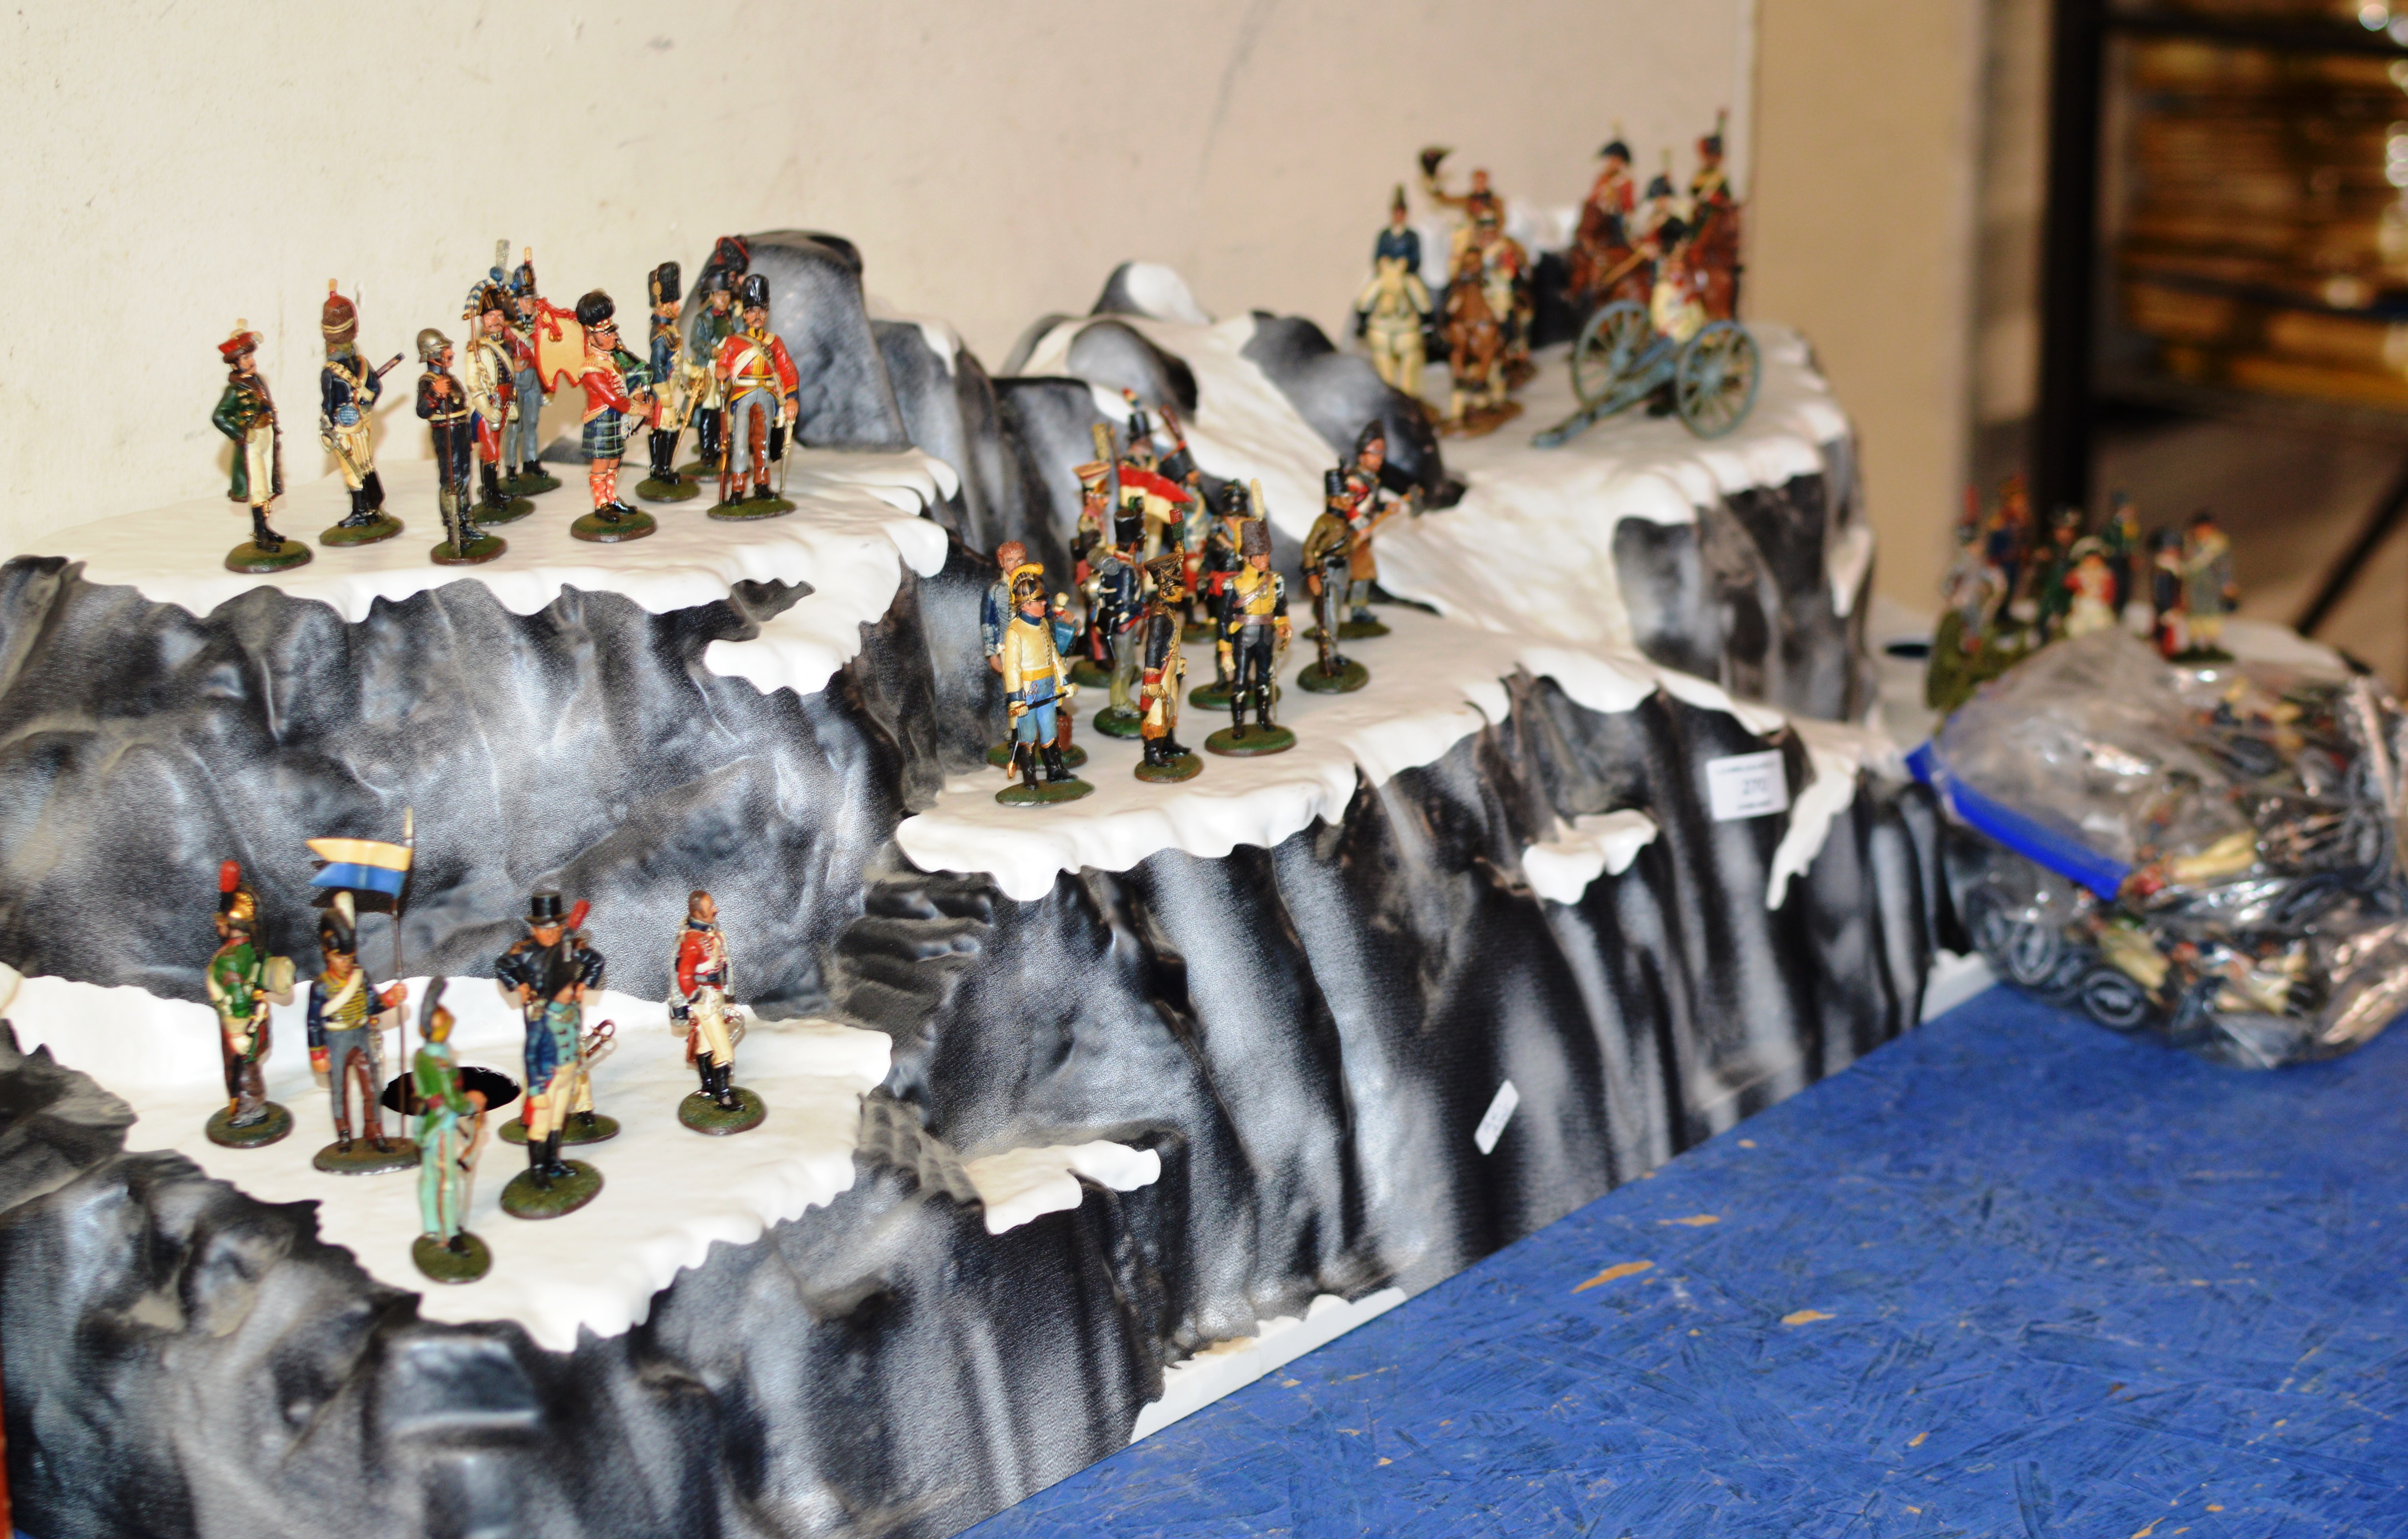 LARGE COLLECTION OF ASSORTED LEAD SOLDIERS WITH DISPLAY STAND & VARIOUS MAGAZINES